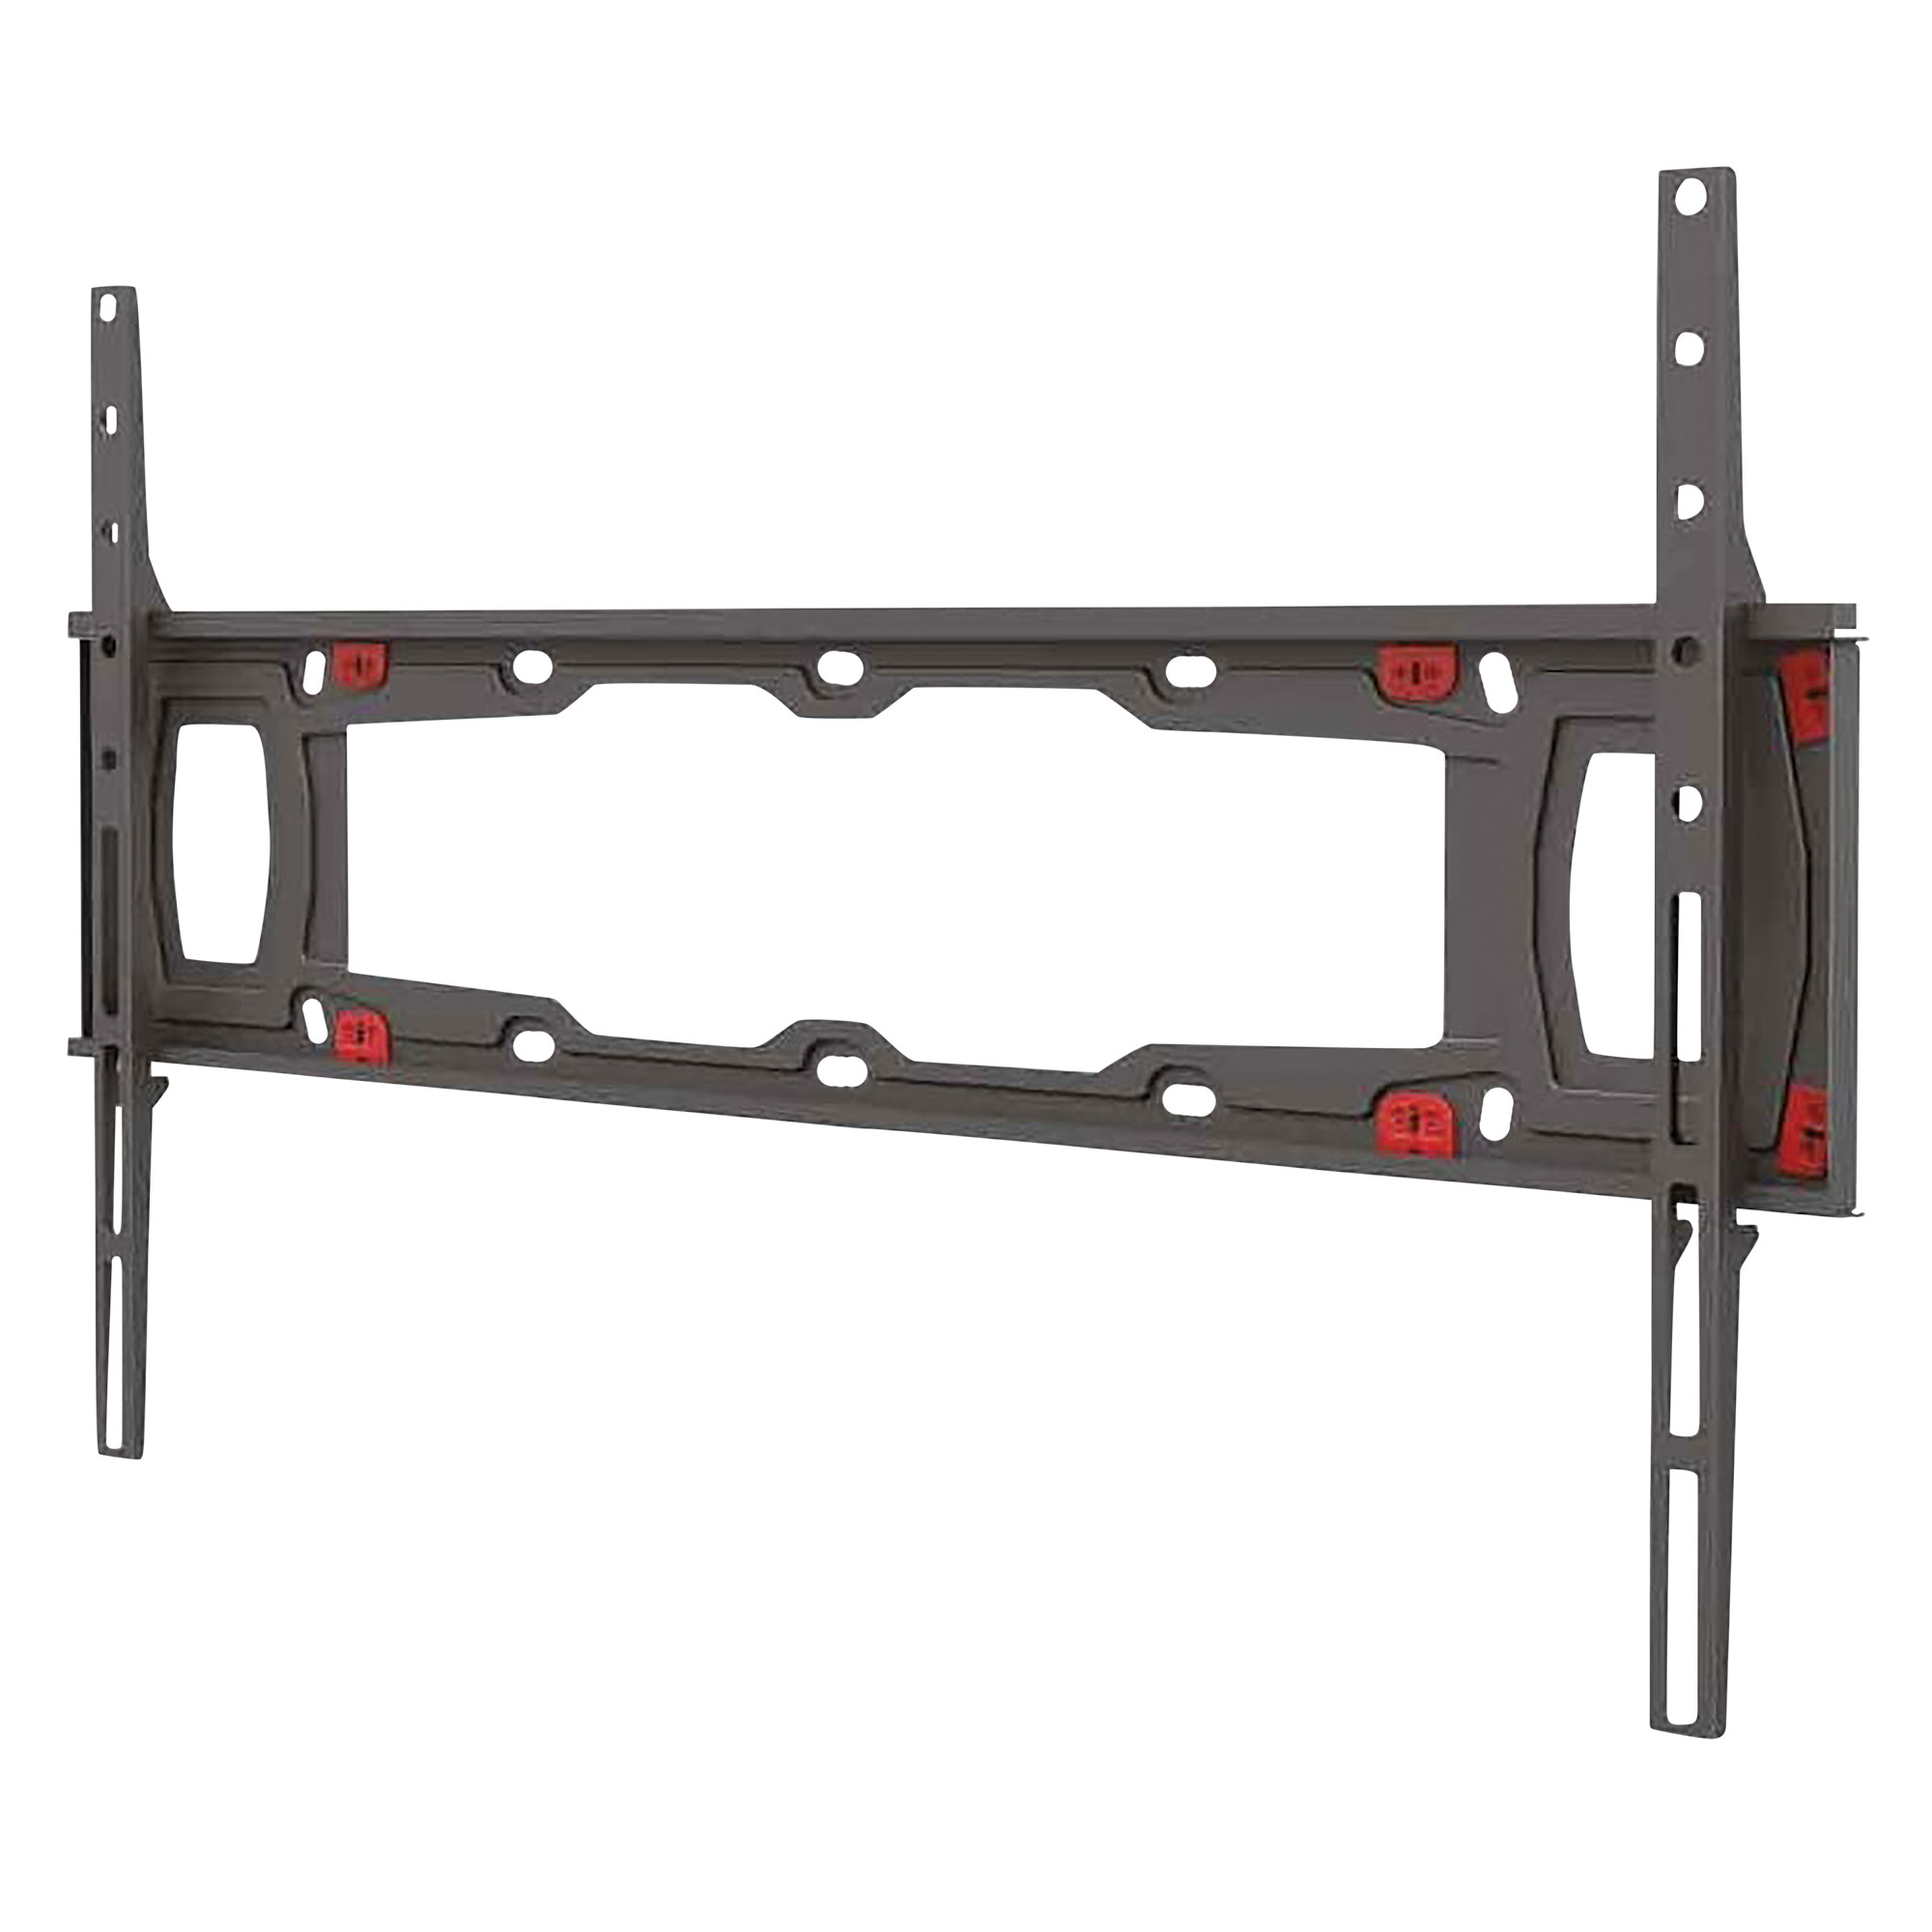 Barkan Wall Mount for 29-75" TVs